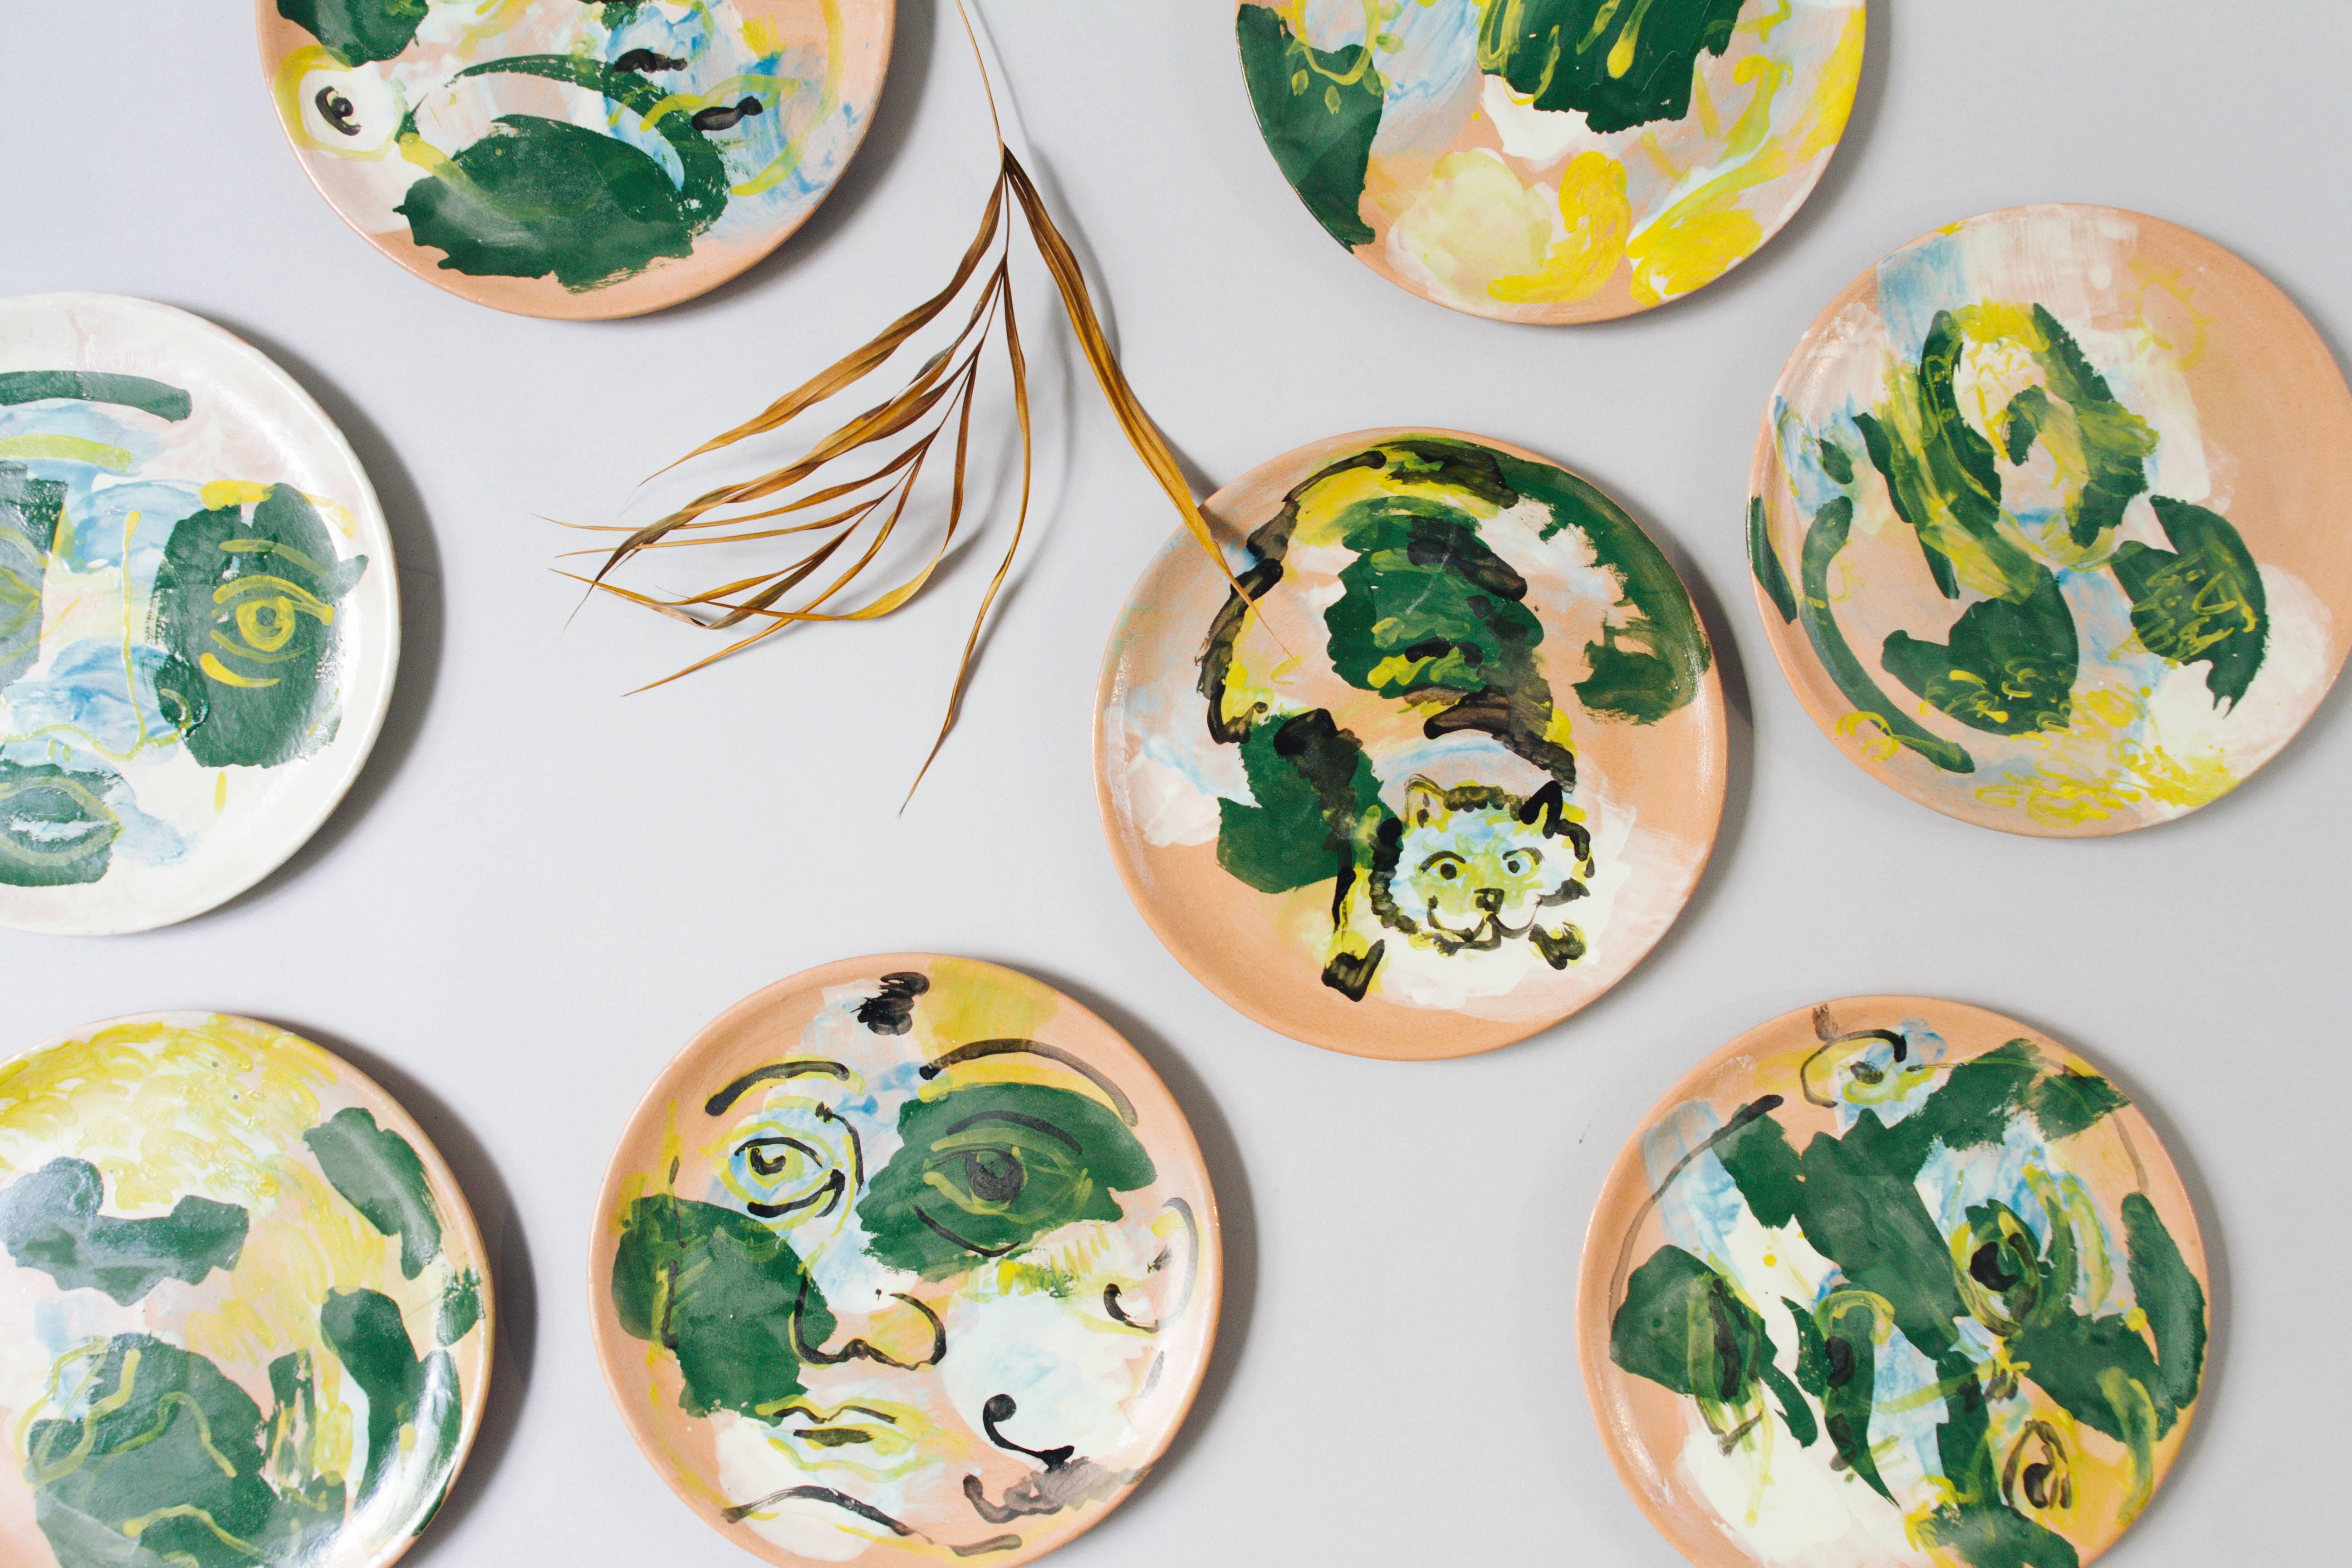 This majolica pottery plate collection was designed by Mexican sculptor, painter and ceramist Lorenzo Lorenzzo — made in his studio, in the colonial town of San Miguel de Allende, in the state of Guanajuato, Mexico. For this limited edition